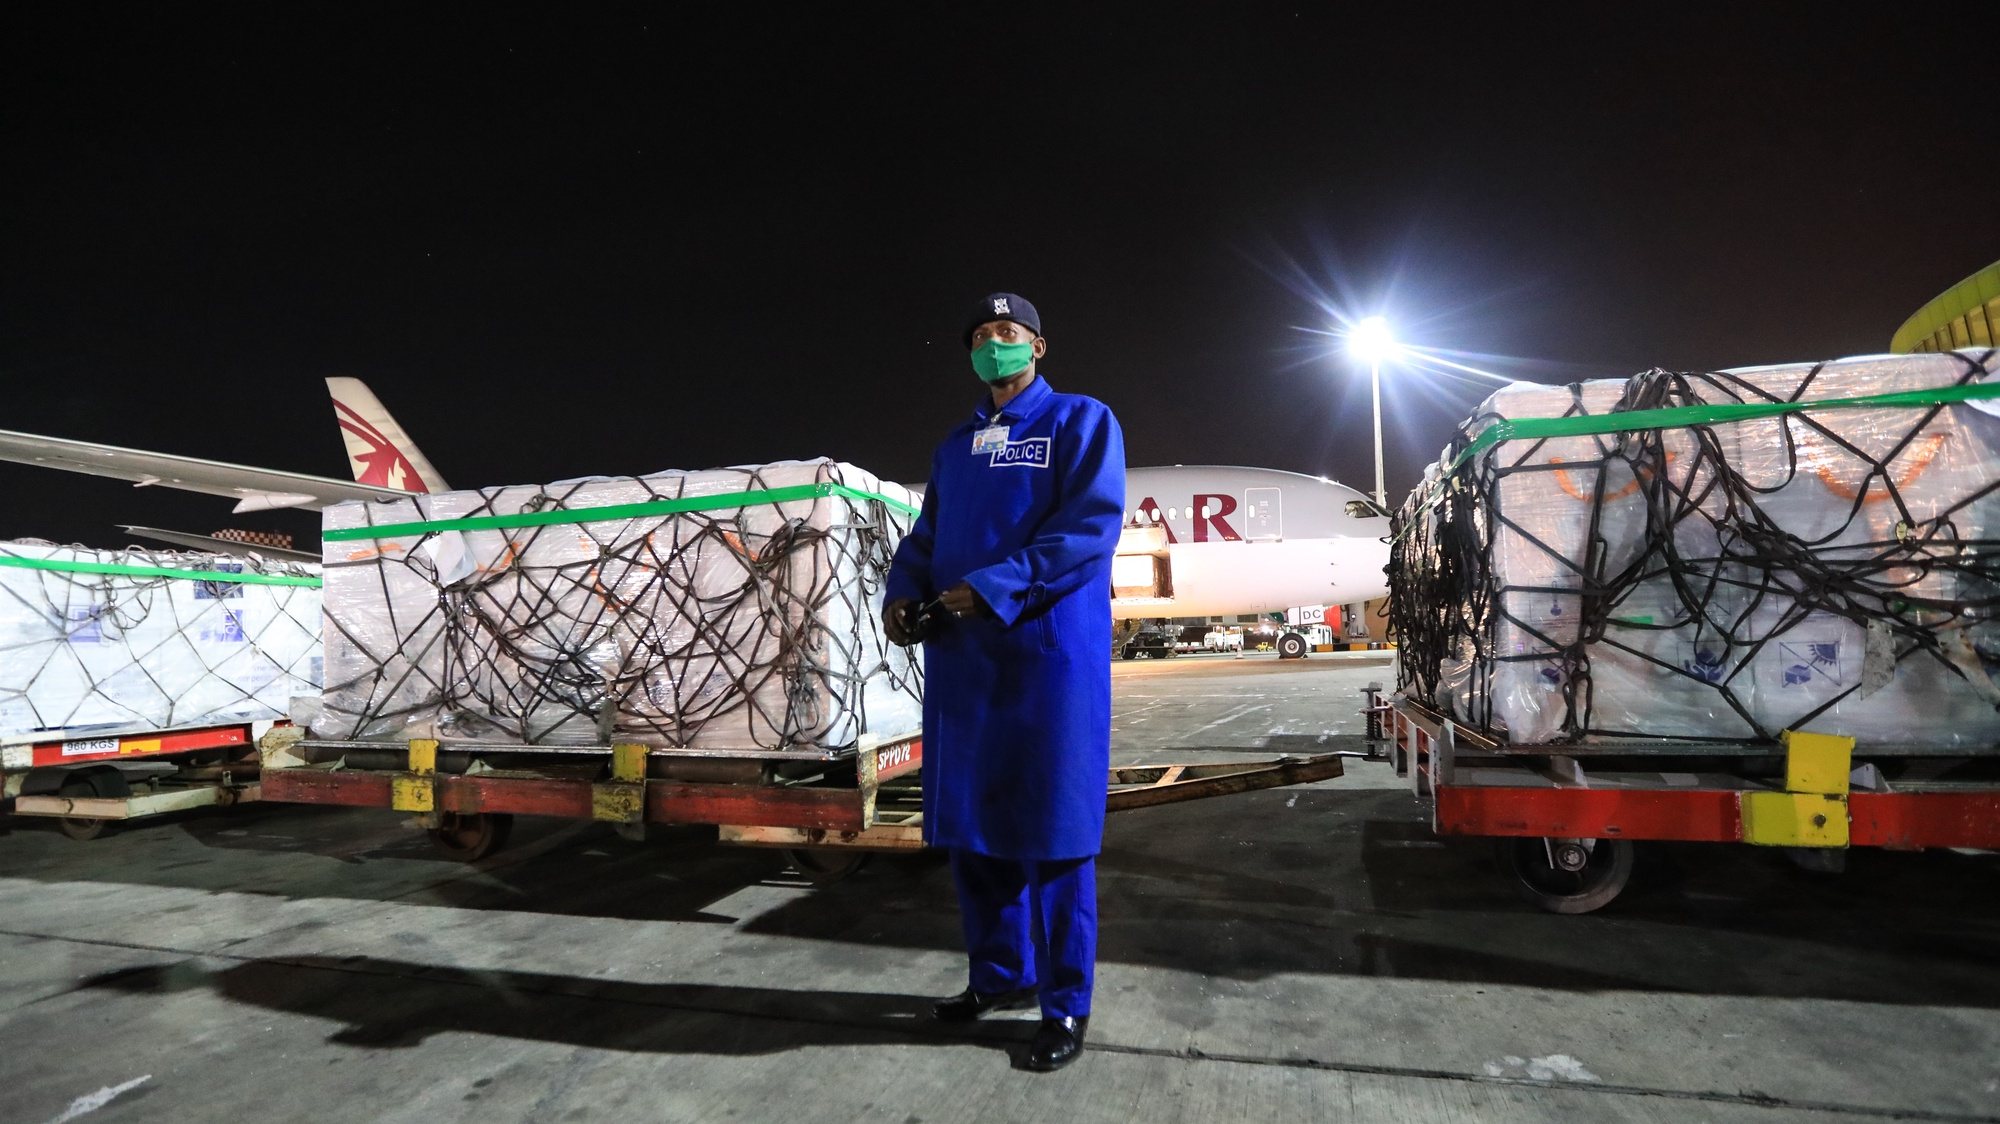 epa09047555 A Kenya police officer (C) stands guard next to some of the first batch of 1.02 million doses of Oxford/AstraZeneca COVID-19 vaccines after being unloaded from a plane upon their arrivals at the Jomo Kenyatta International Airport (JKIA), in Nairobi, Kenya, 03 March 2021. Kenya has received its first batch of COVID-19 vaccines, becoming the first East African country to receive vaccines through COVAX. The East African country is expected to import 24 million doses in couple of months. The first batch are expected to be prioritized to be vaccinated to the health sector workers and security personnel among others.  EPA/Daniel Irungu